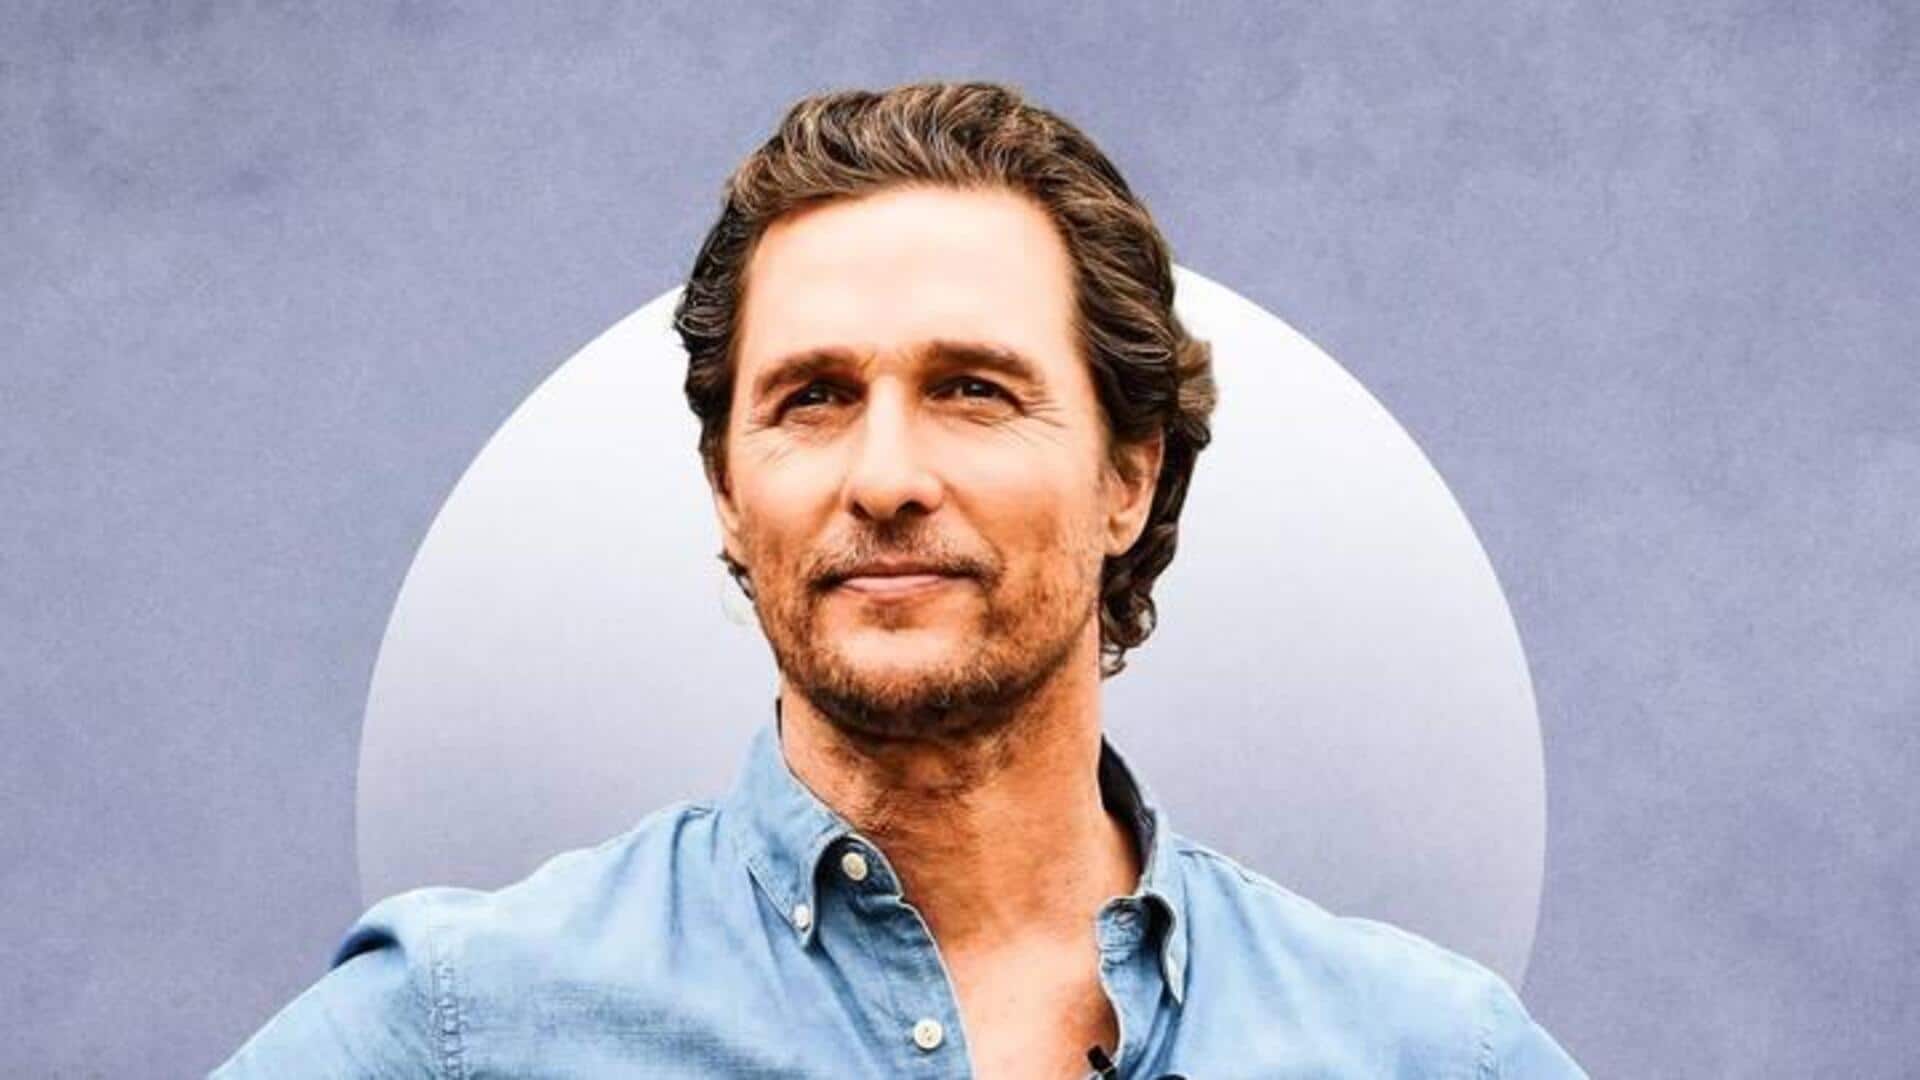 'It was scary': Matthew McConaughey on his hiatus from Hollywood